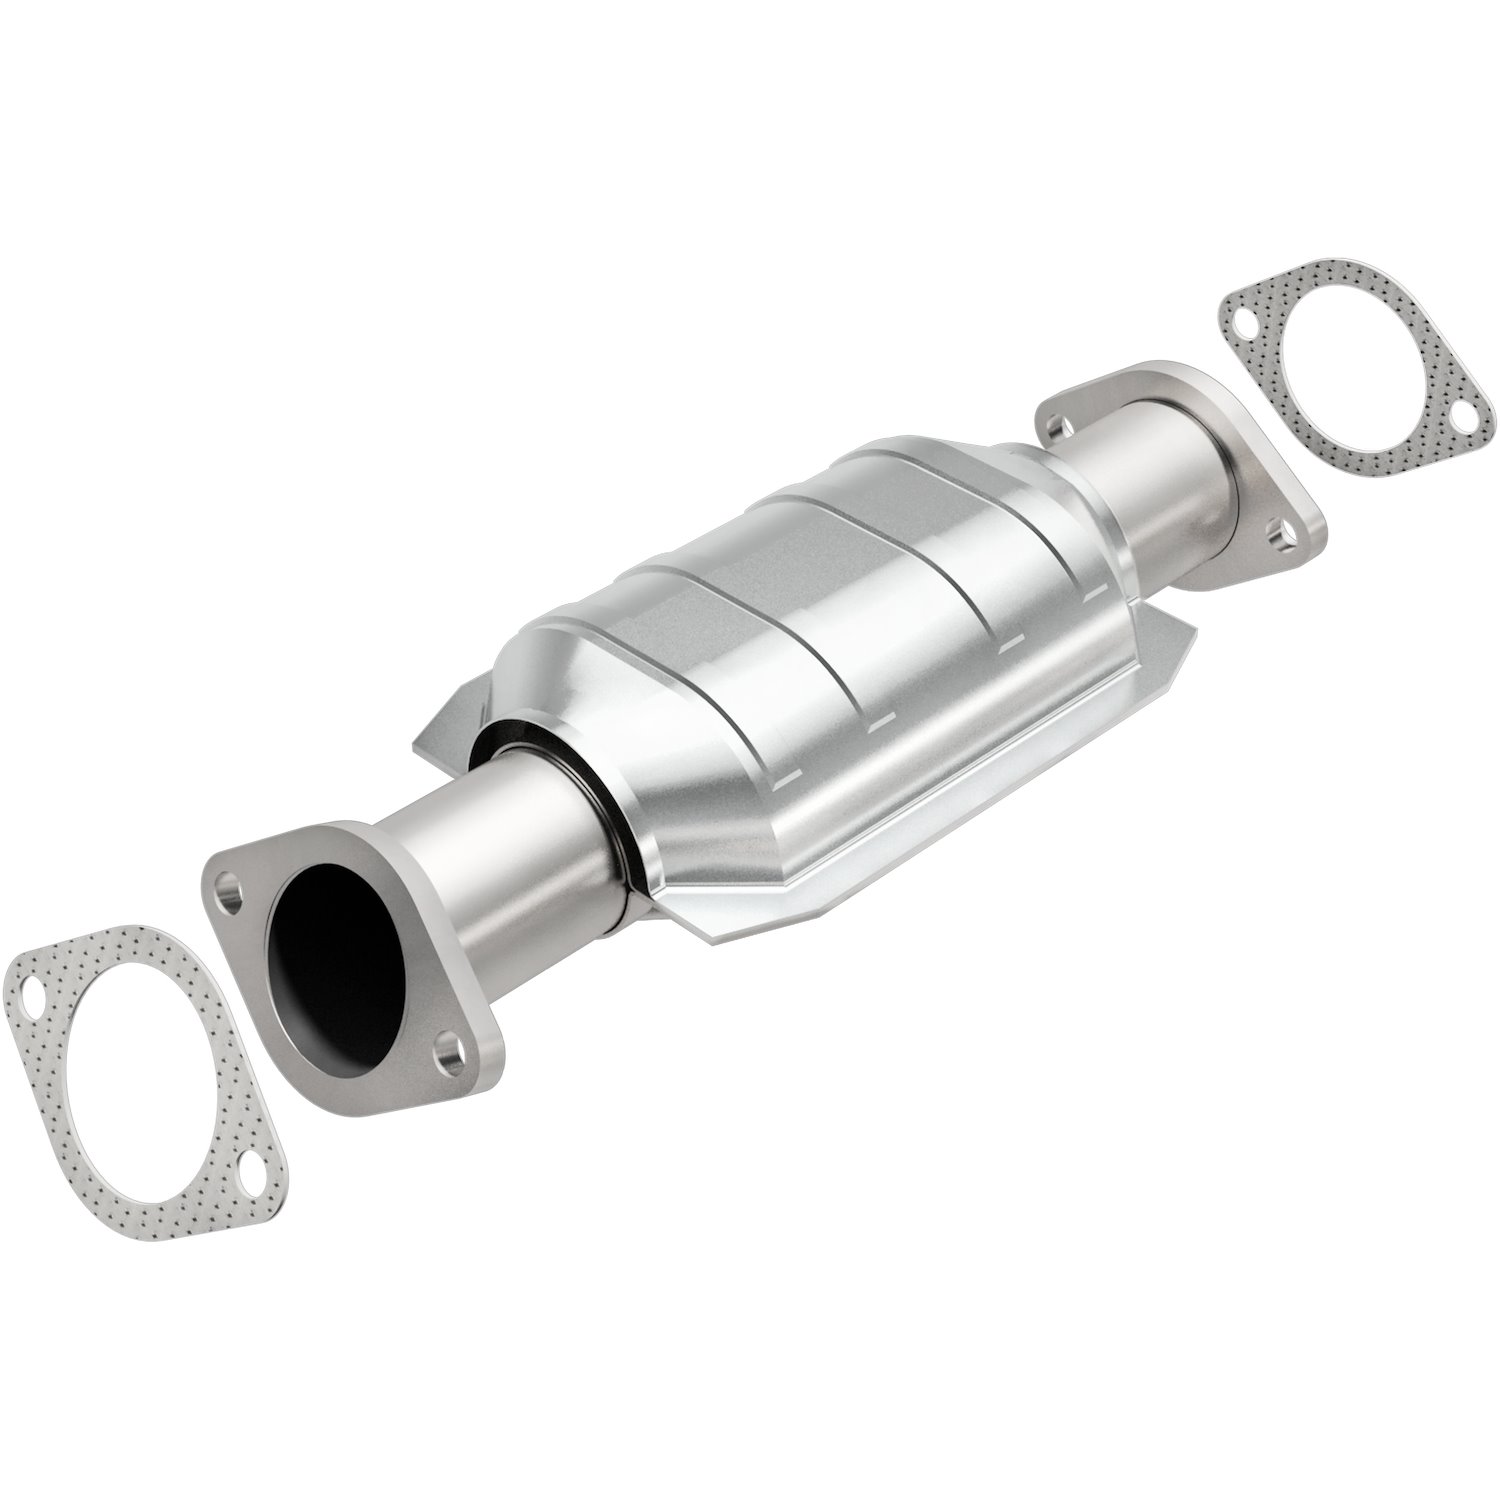 HM Grade Federal / EPA Compliant Direct-Fit Catalytic Converter 93176